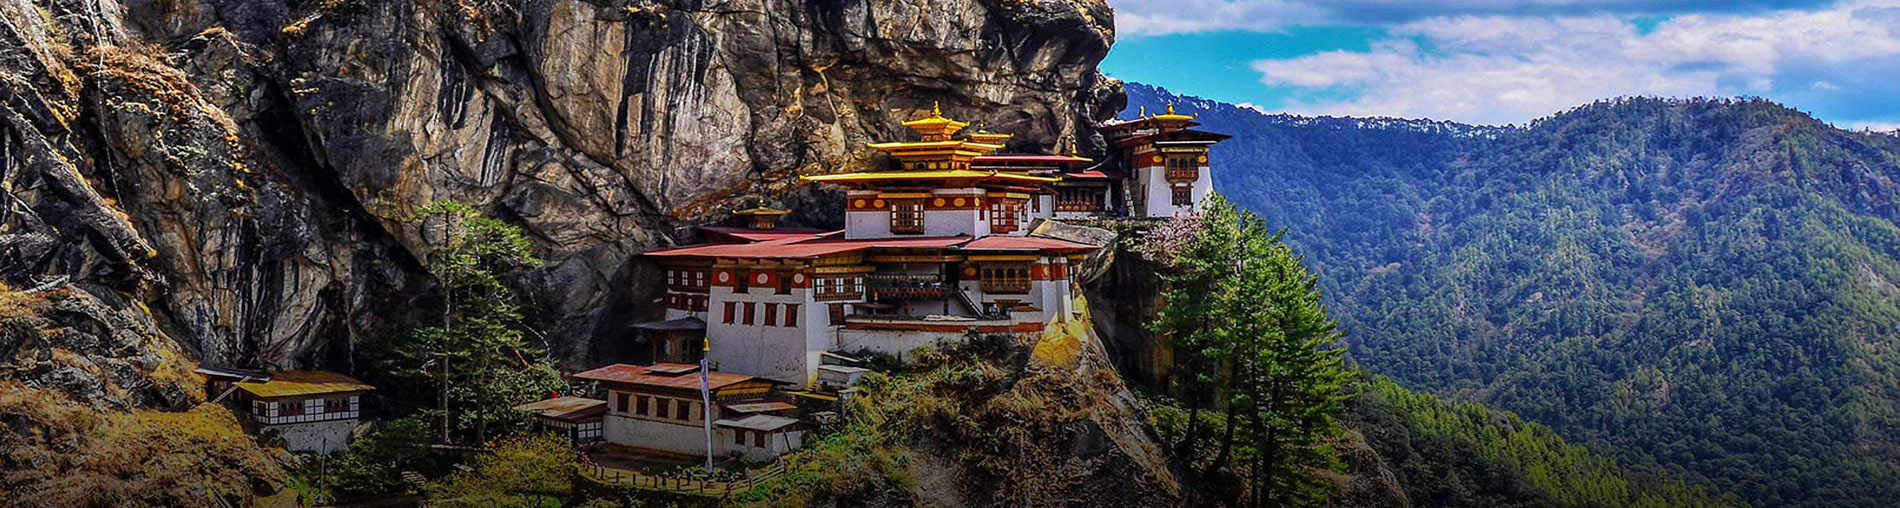 Bhutan Holiday Tour Packages From India